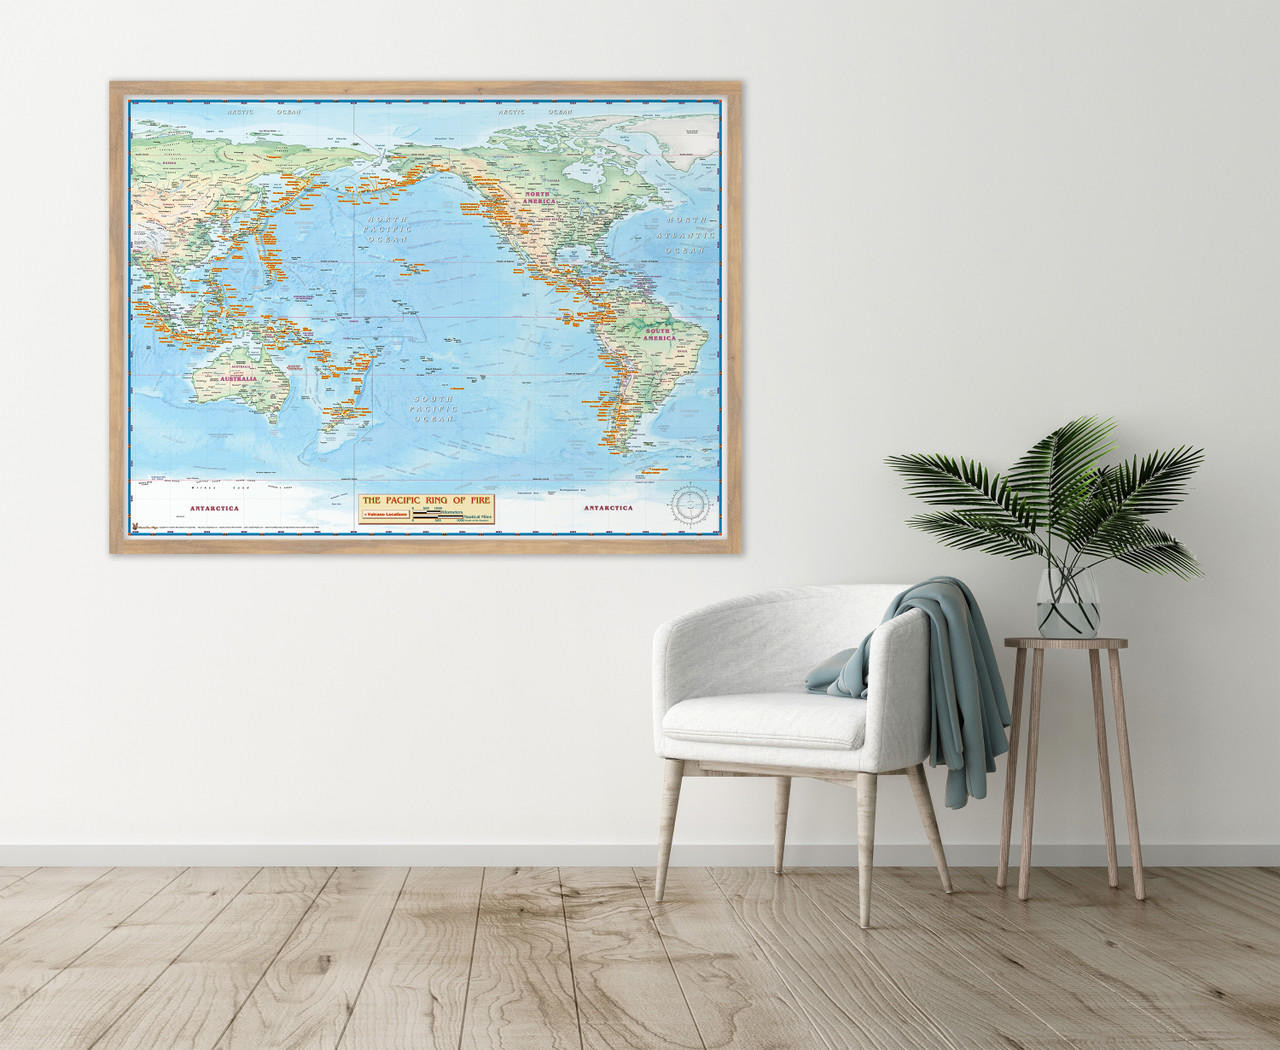 zo delicaat kalf Ring of Fire Physical Wall Map w/ Volcano Locations | World Maps Online